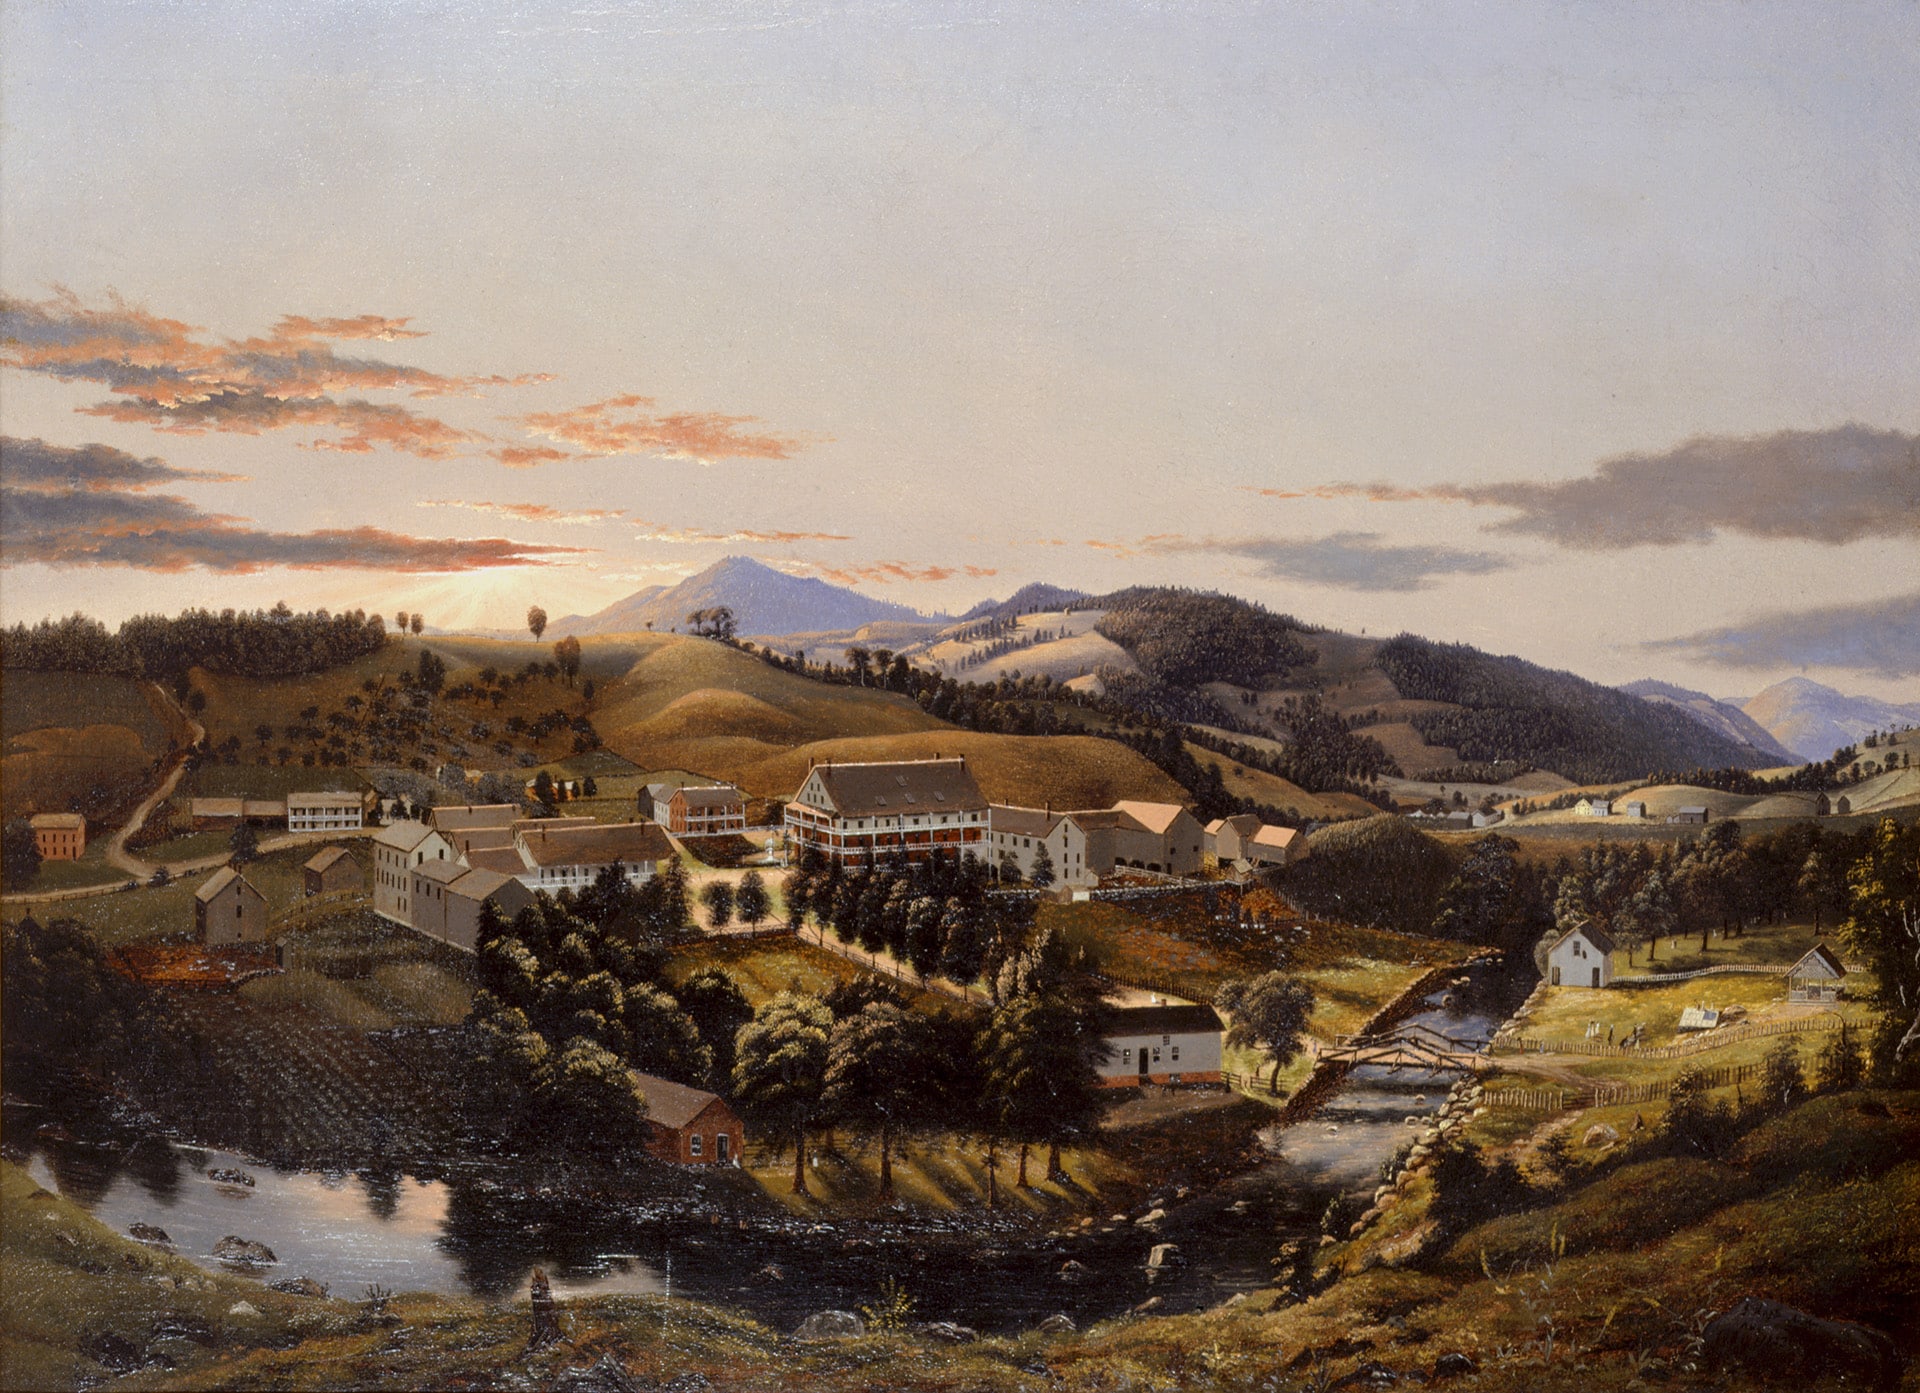 a landscape with mountains, a river, and buildings seen from a birds-eye view